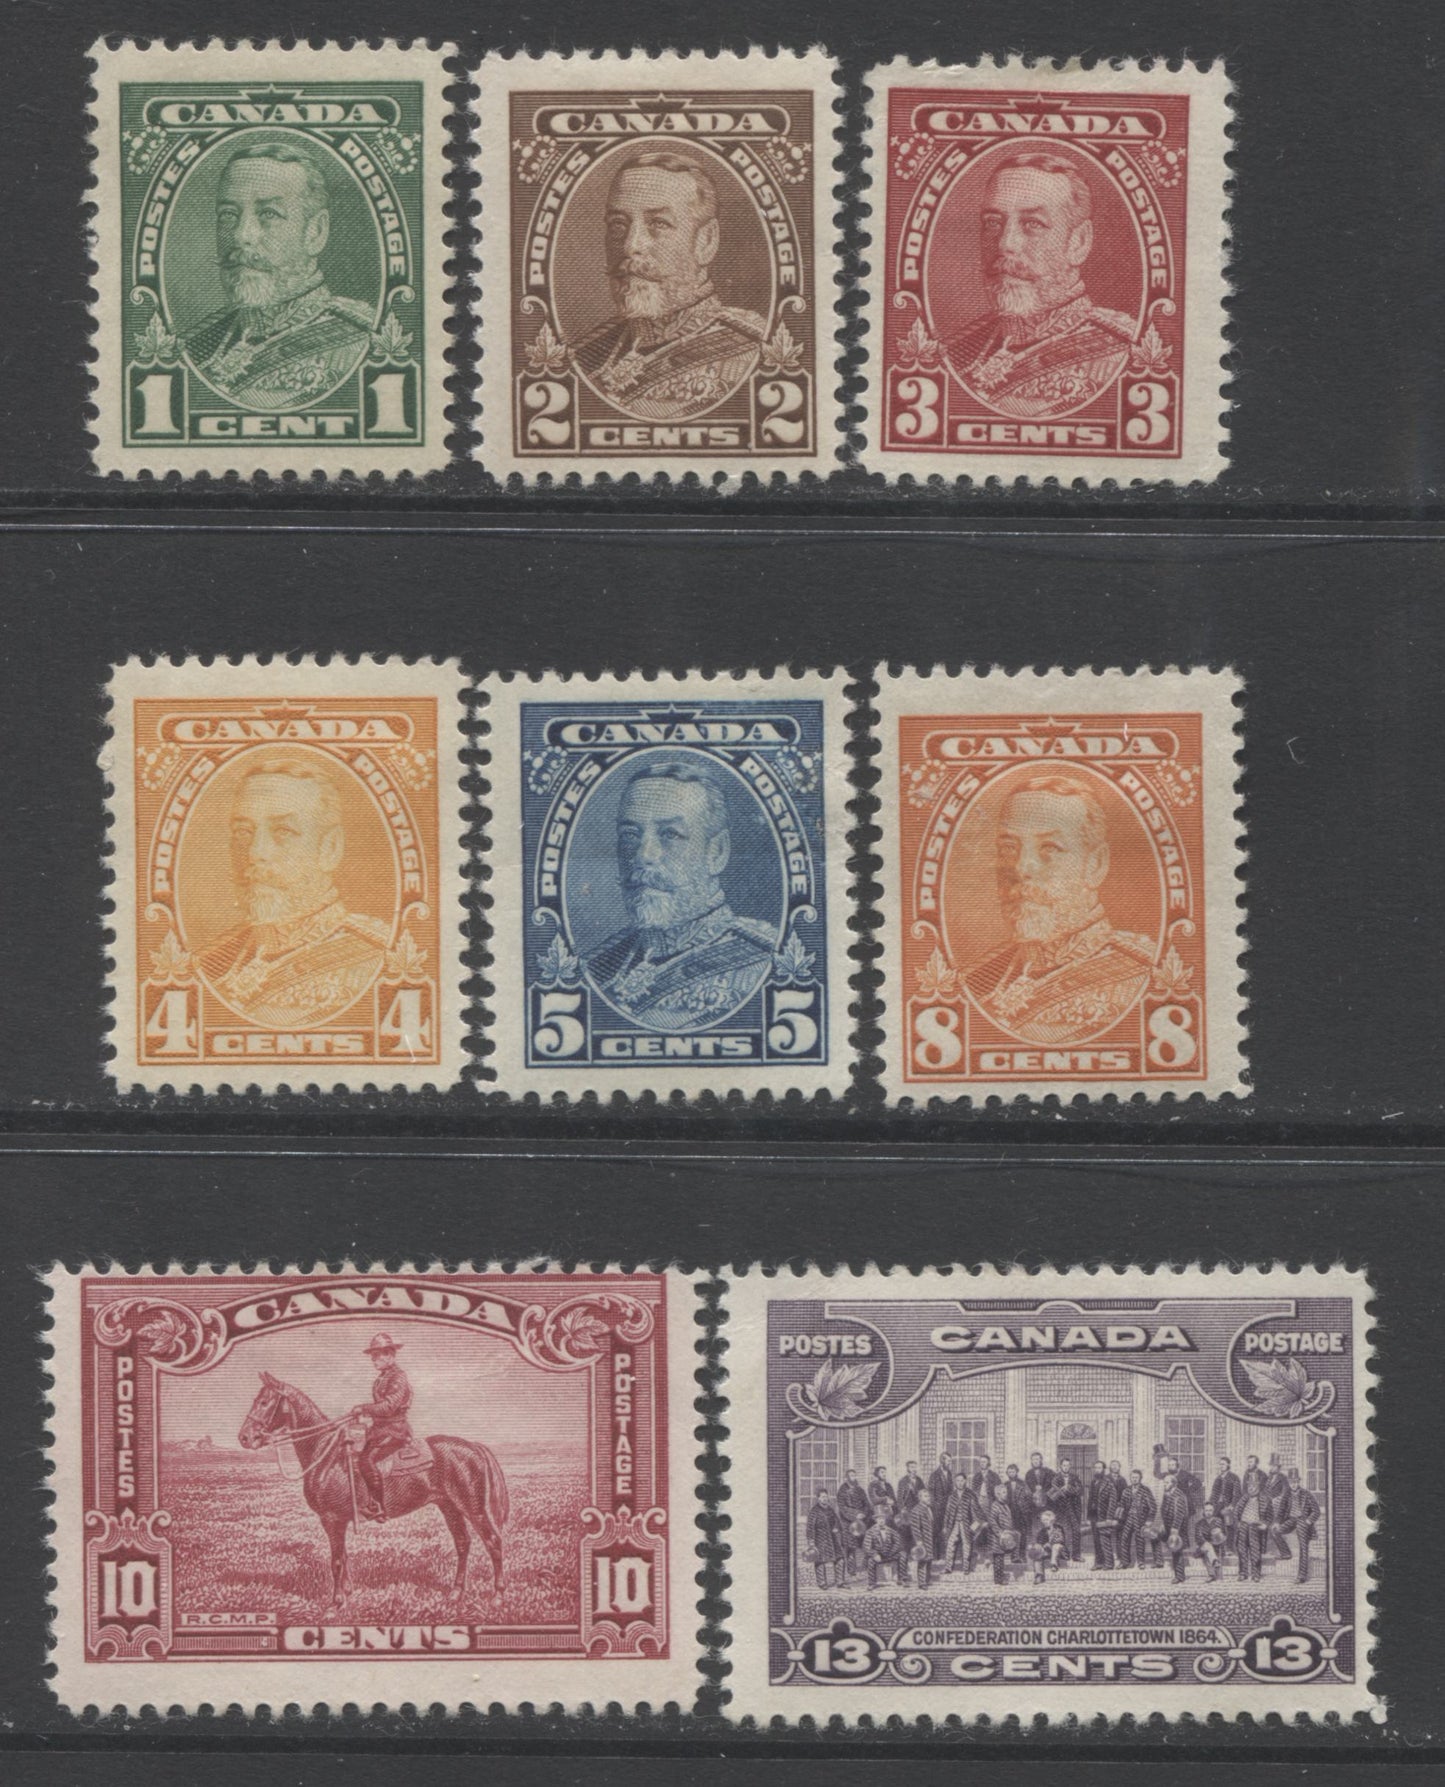 Lot 36 Canada #217-224 1c - 13c Green - Violet King George V - Charlottetown, 1935 Pictorial Issue, 8 Mostly VFOG Singles